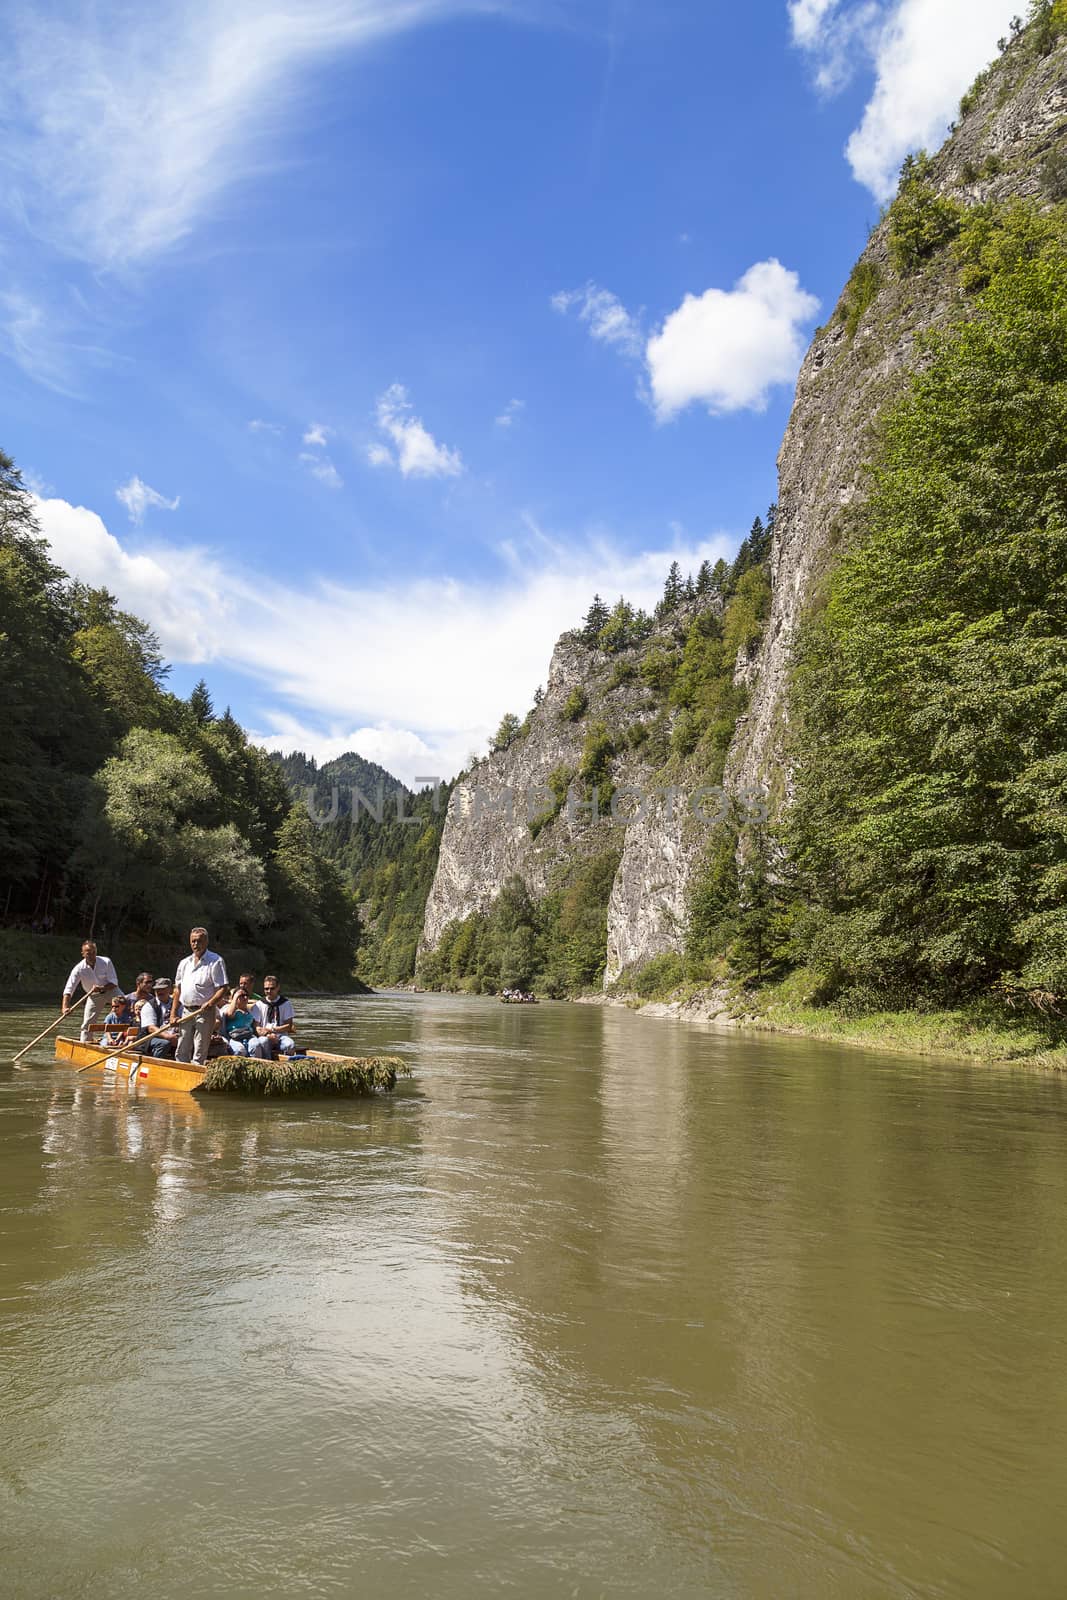 SZCZAWNICA, POLAND - AUGUST 14, 2016 : Dunajec River Gorge .View from boat rafting. 18-kilometer  route runs through the Pieniny Mountains to Szczawnica, National Park,  by river on the border between Poland and Slovakia.